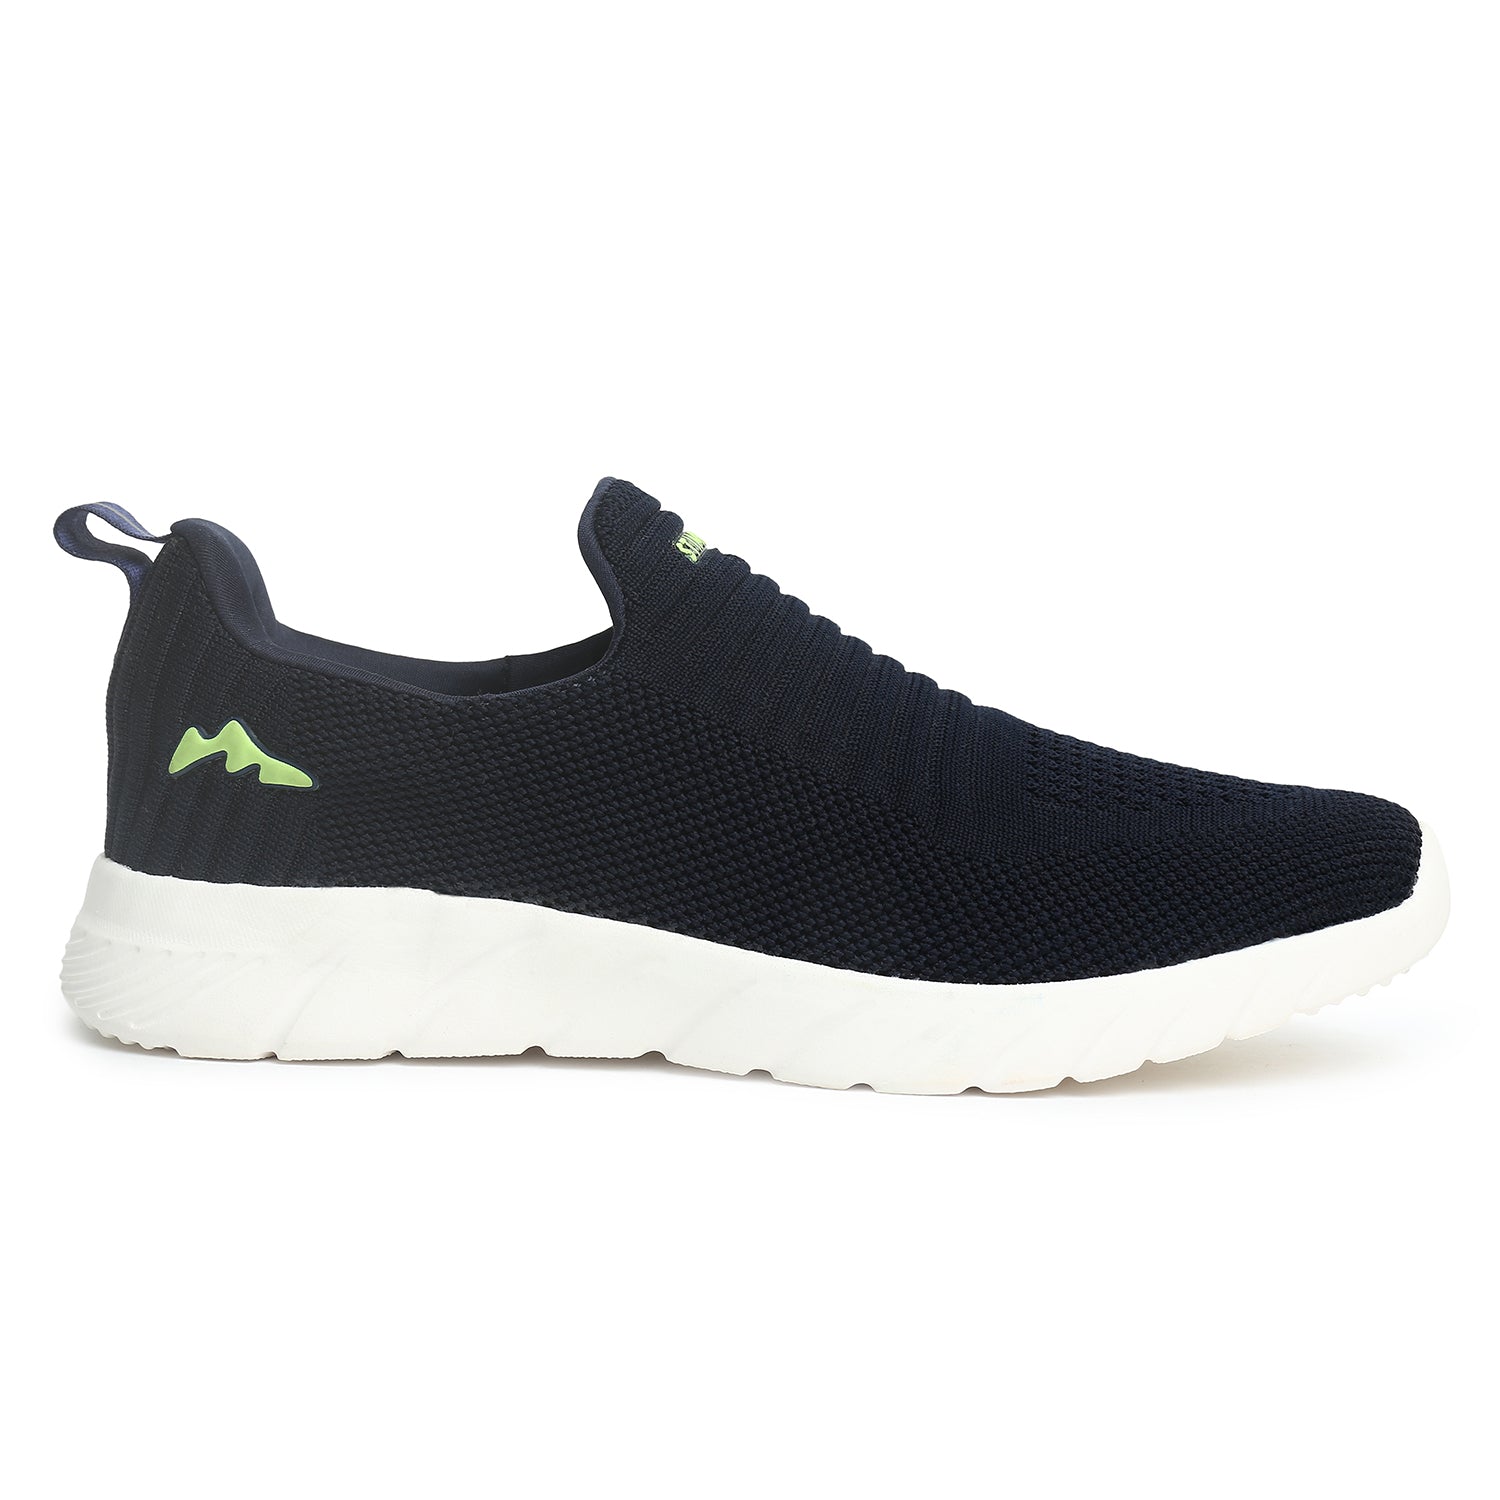 Paragon Stimulus Casual Blue Knitted Training Shoes for Men